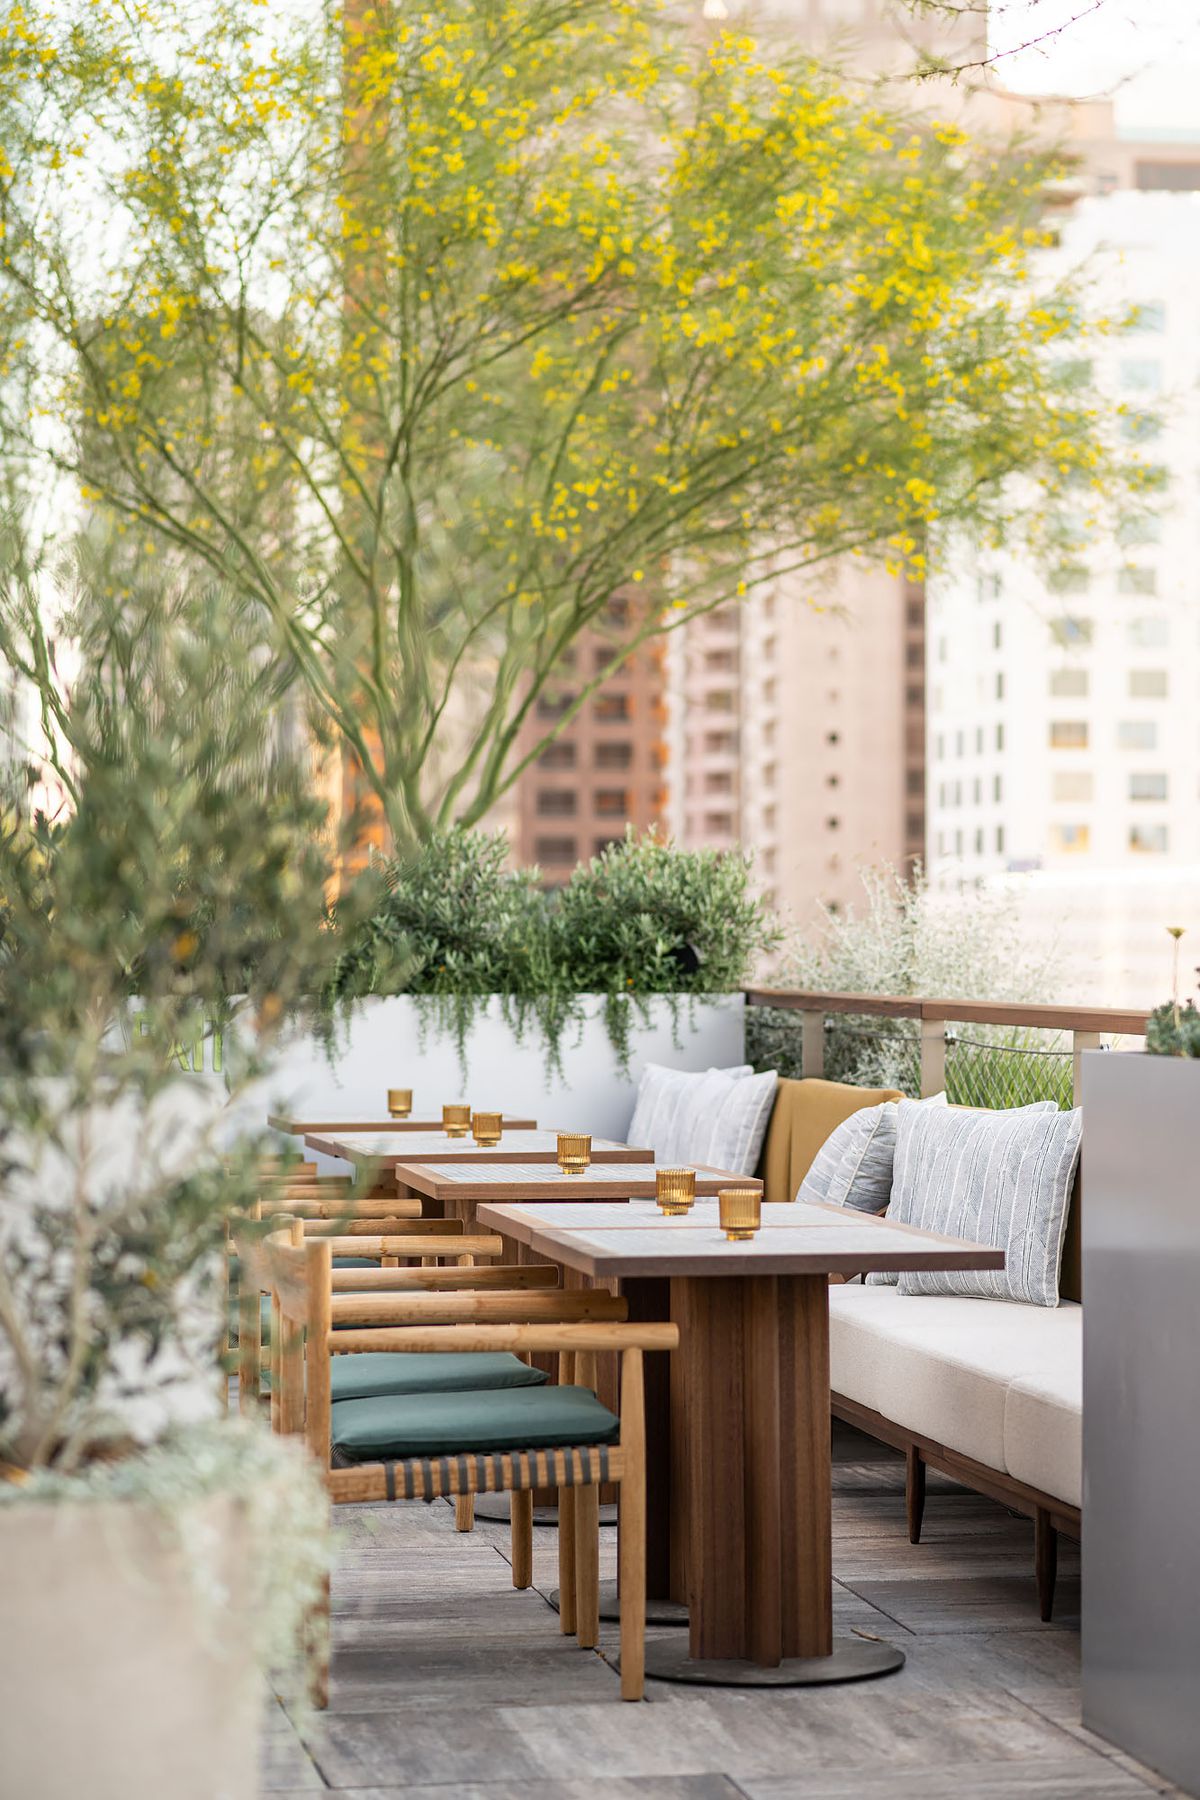 Desert plants and light tones touch off this new restaurant terrace.